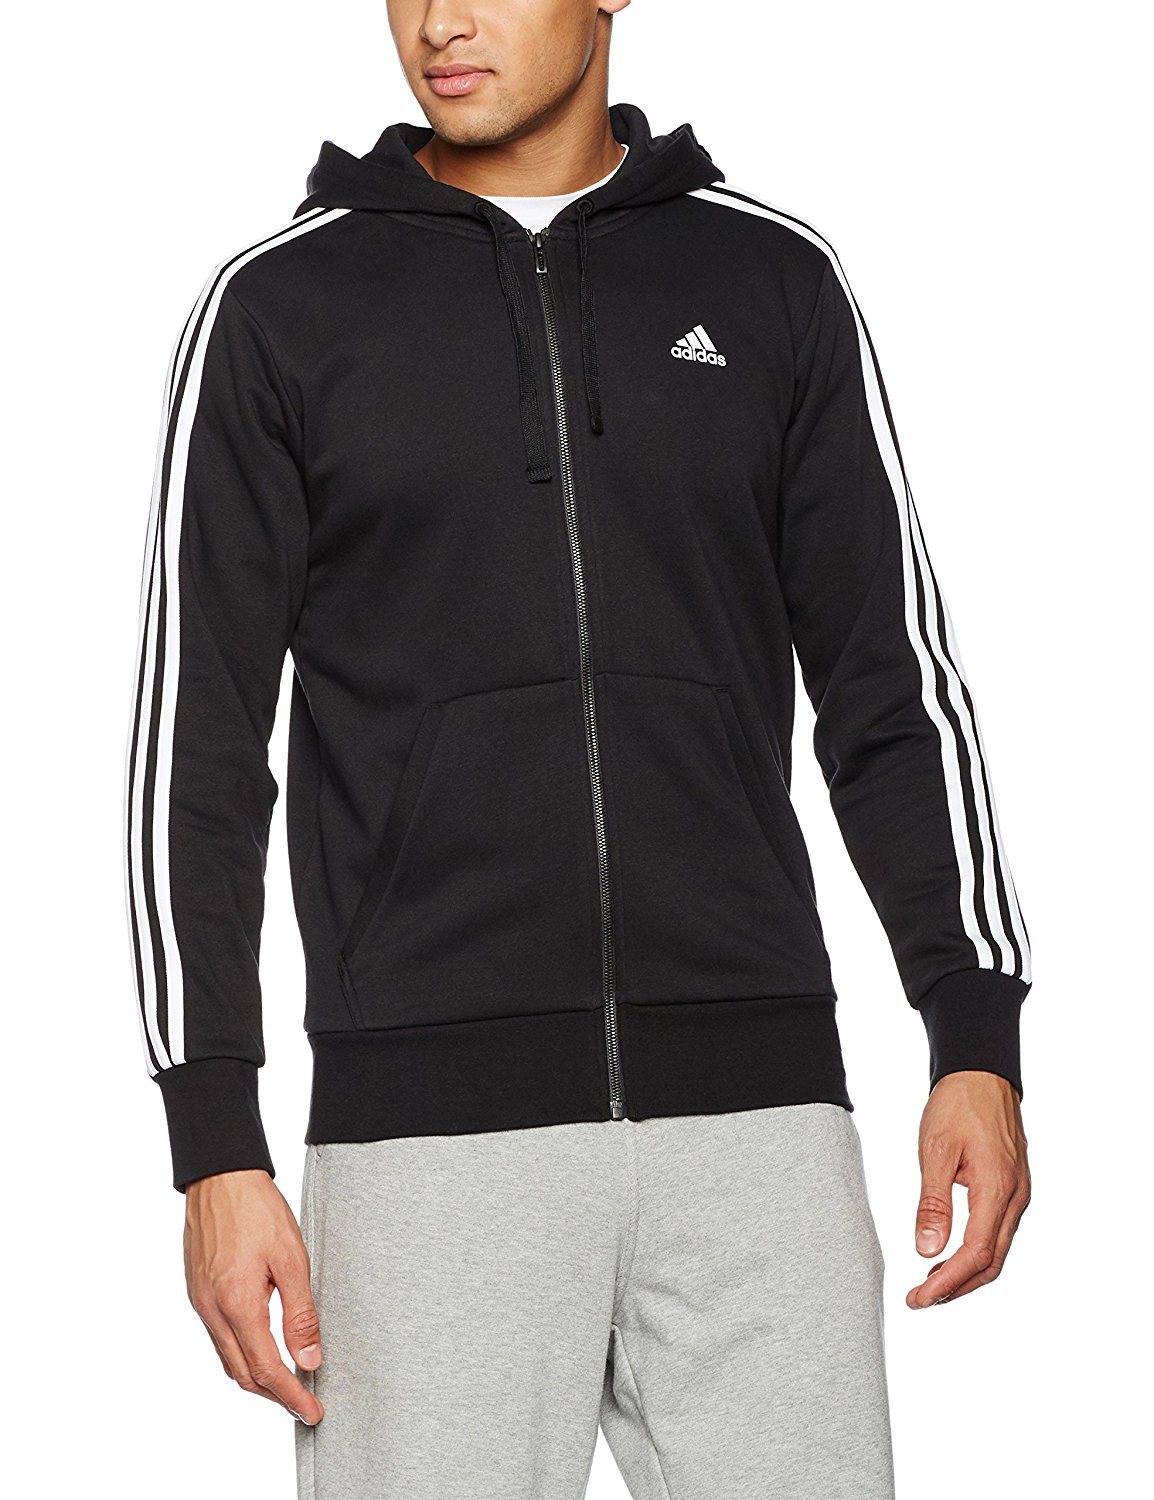 ADIDAS MEN'S ESSENTIALS 3 STRIPES FULL-ZIP FRENCH TERRY HOODIE - Sports